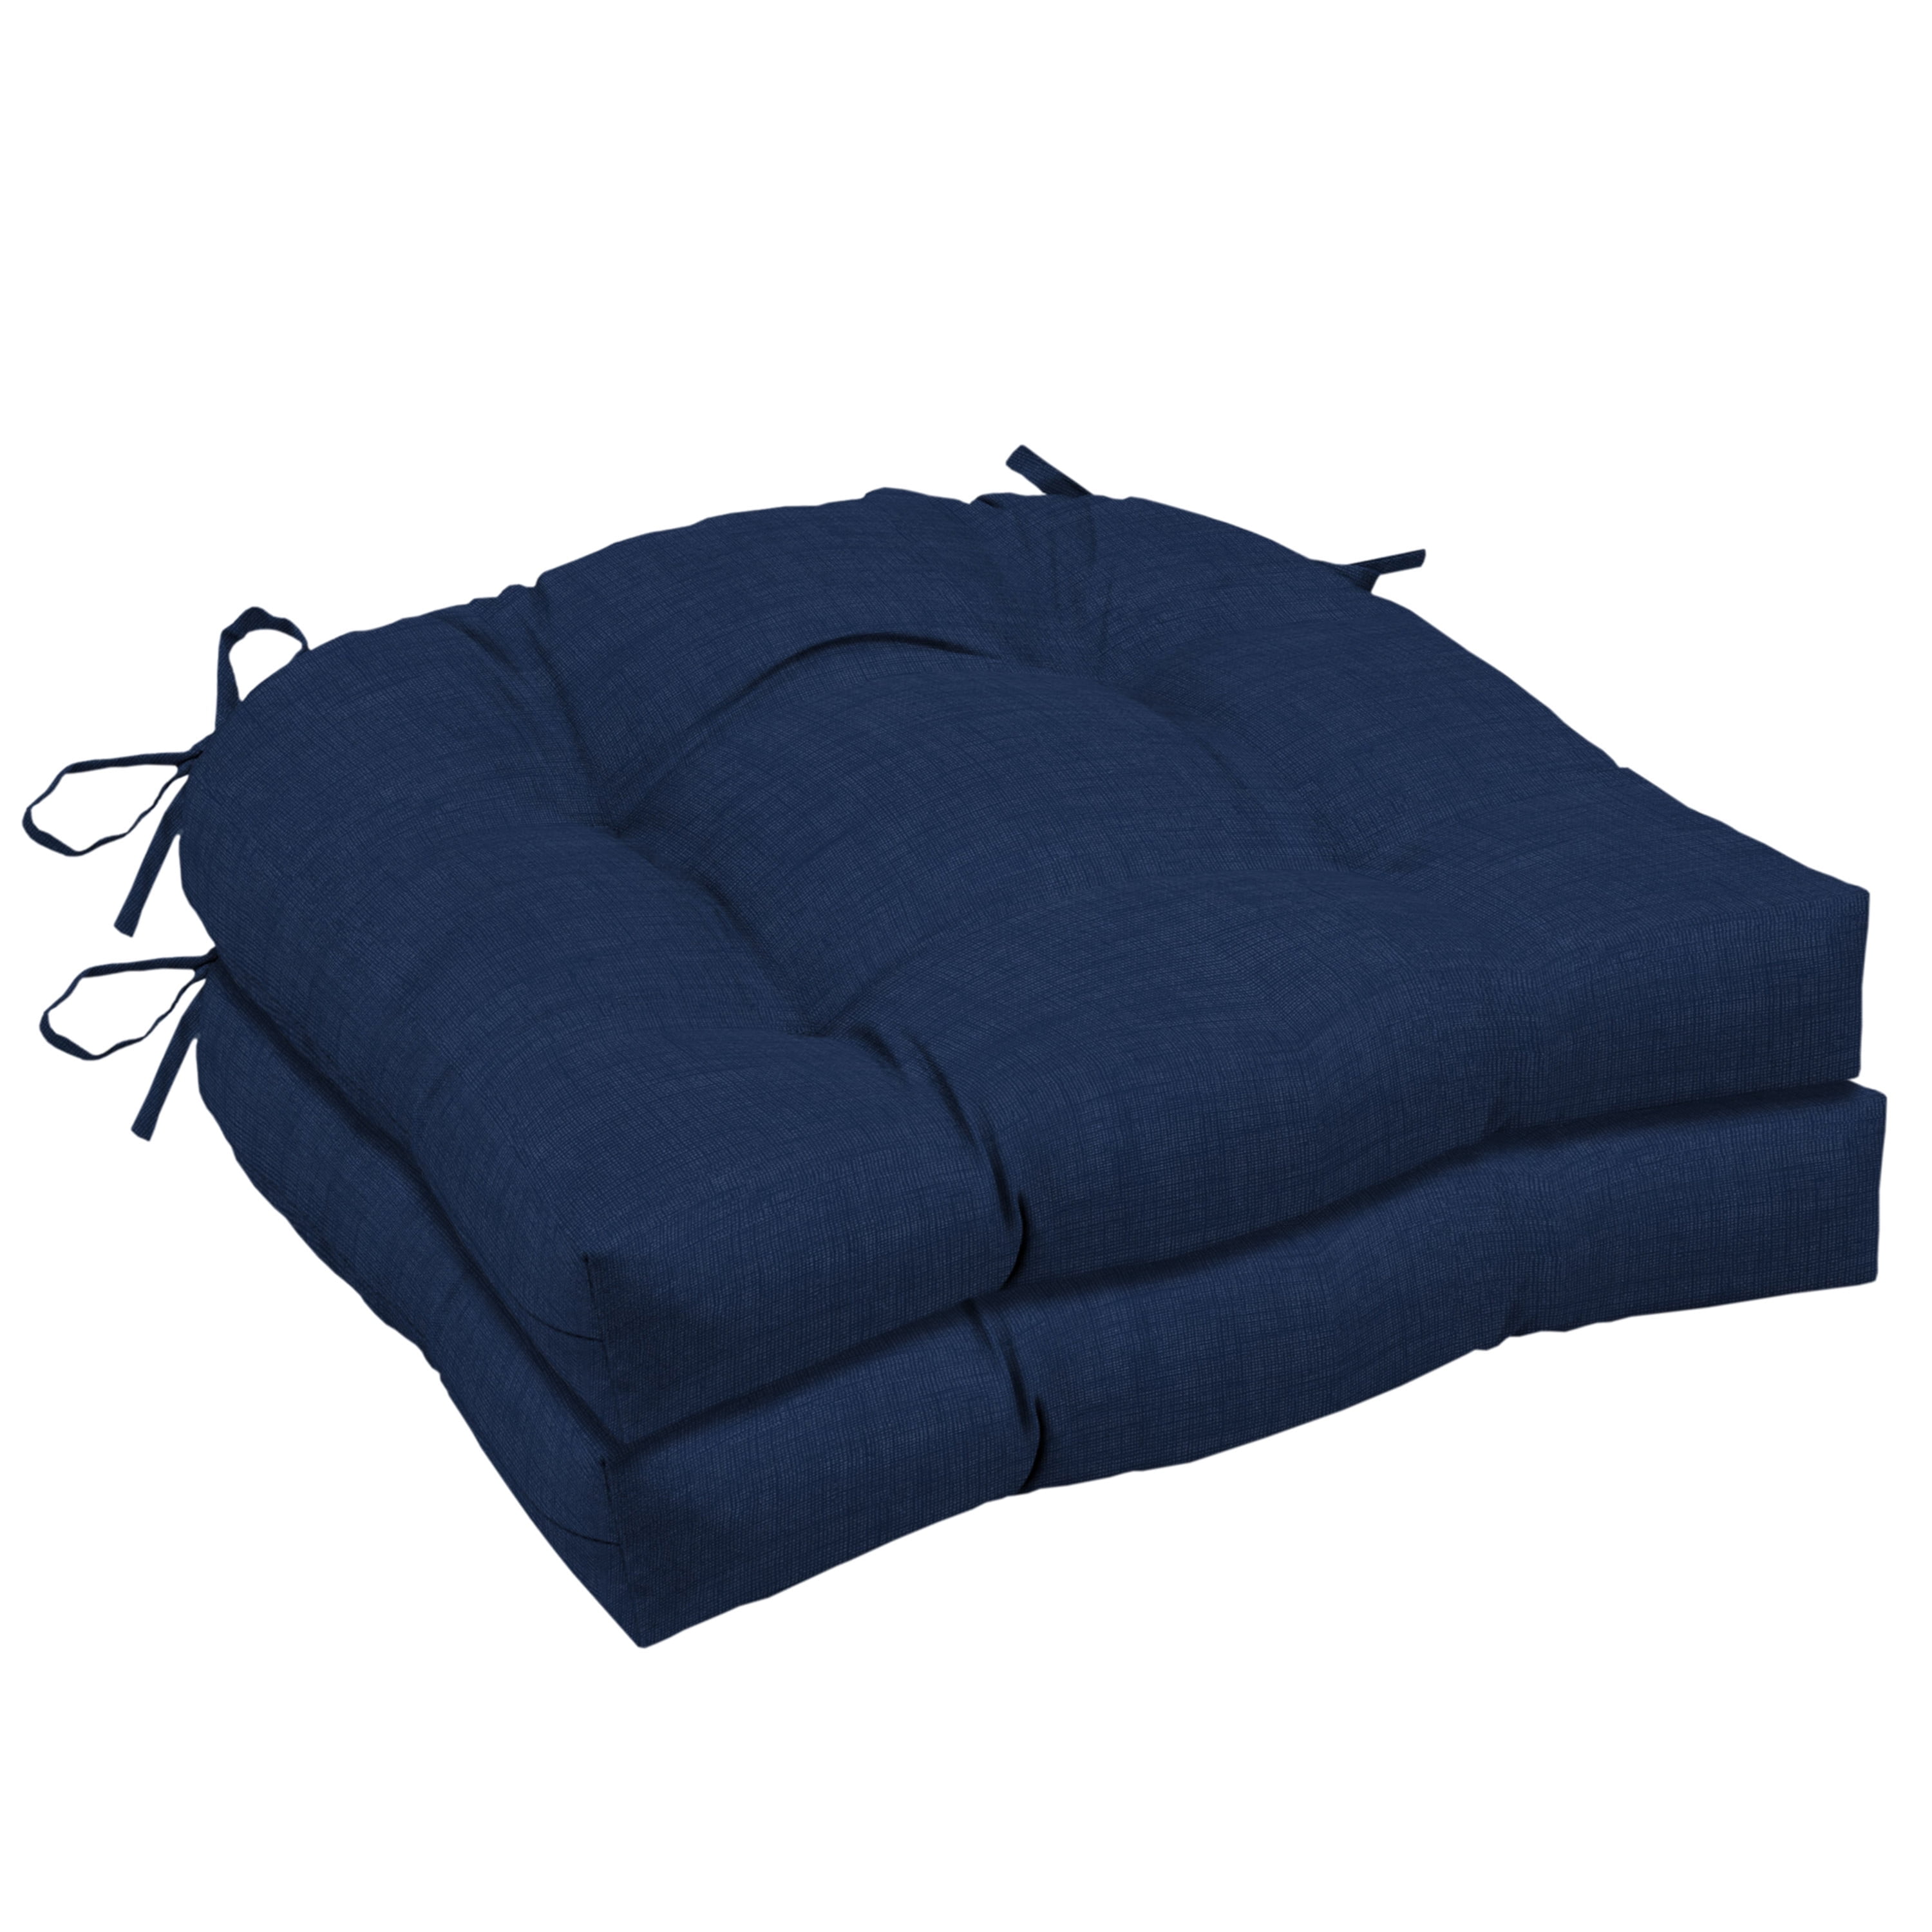 Kensington Garden 2pc 21x21 Solid Outdoor Seat and Back Cushion Set Navy